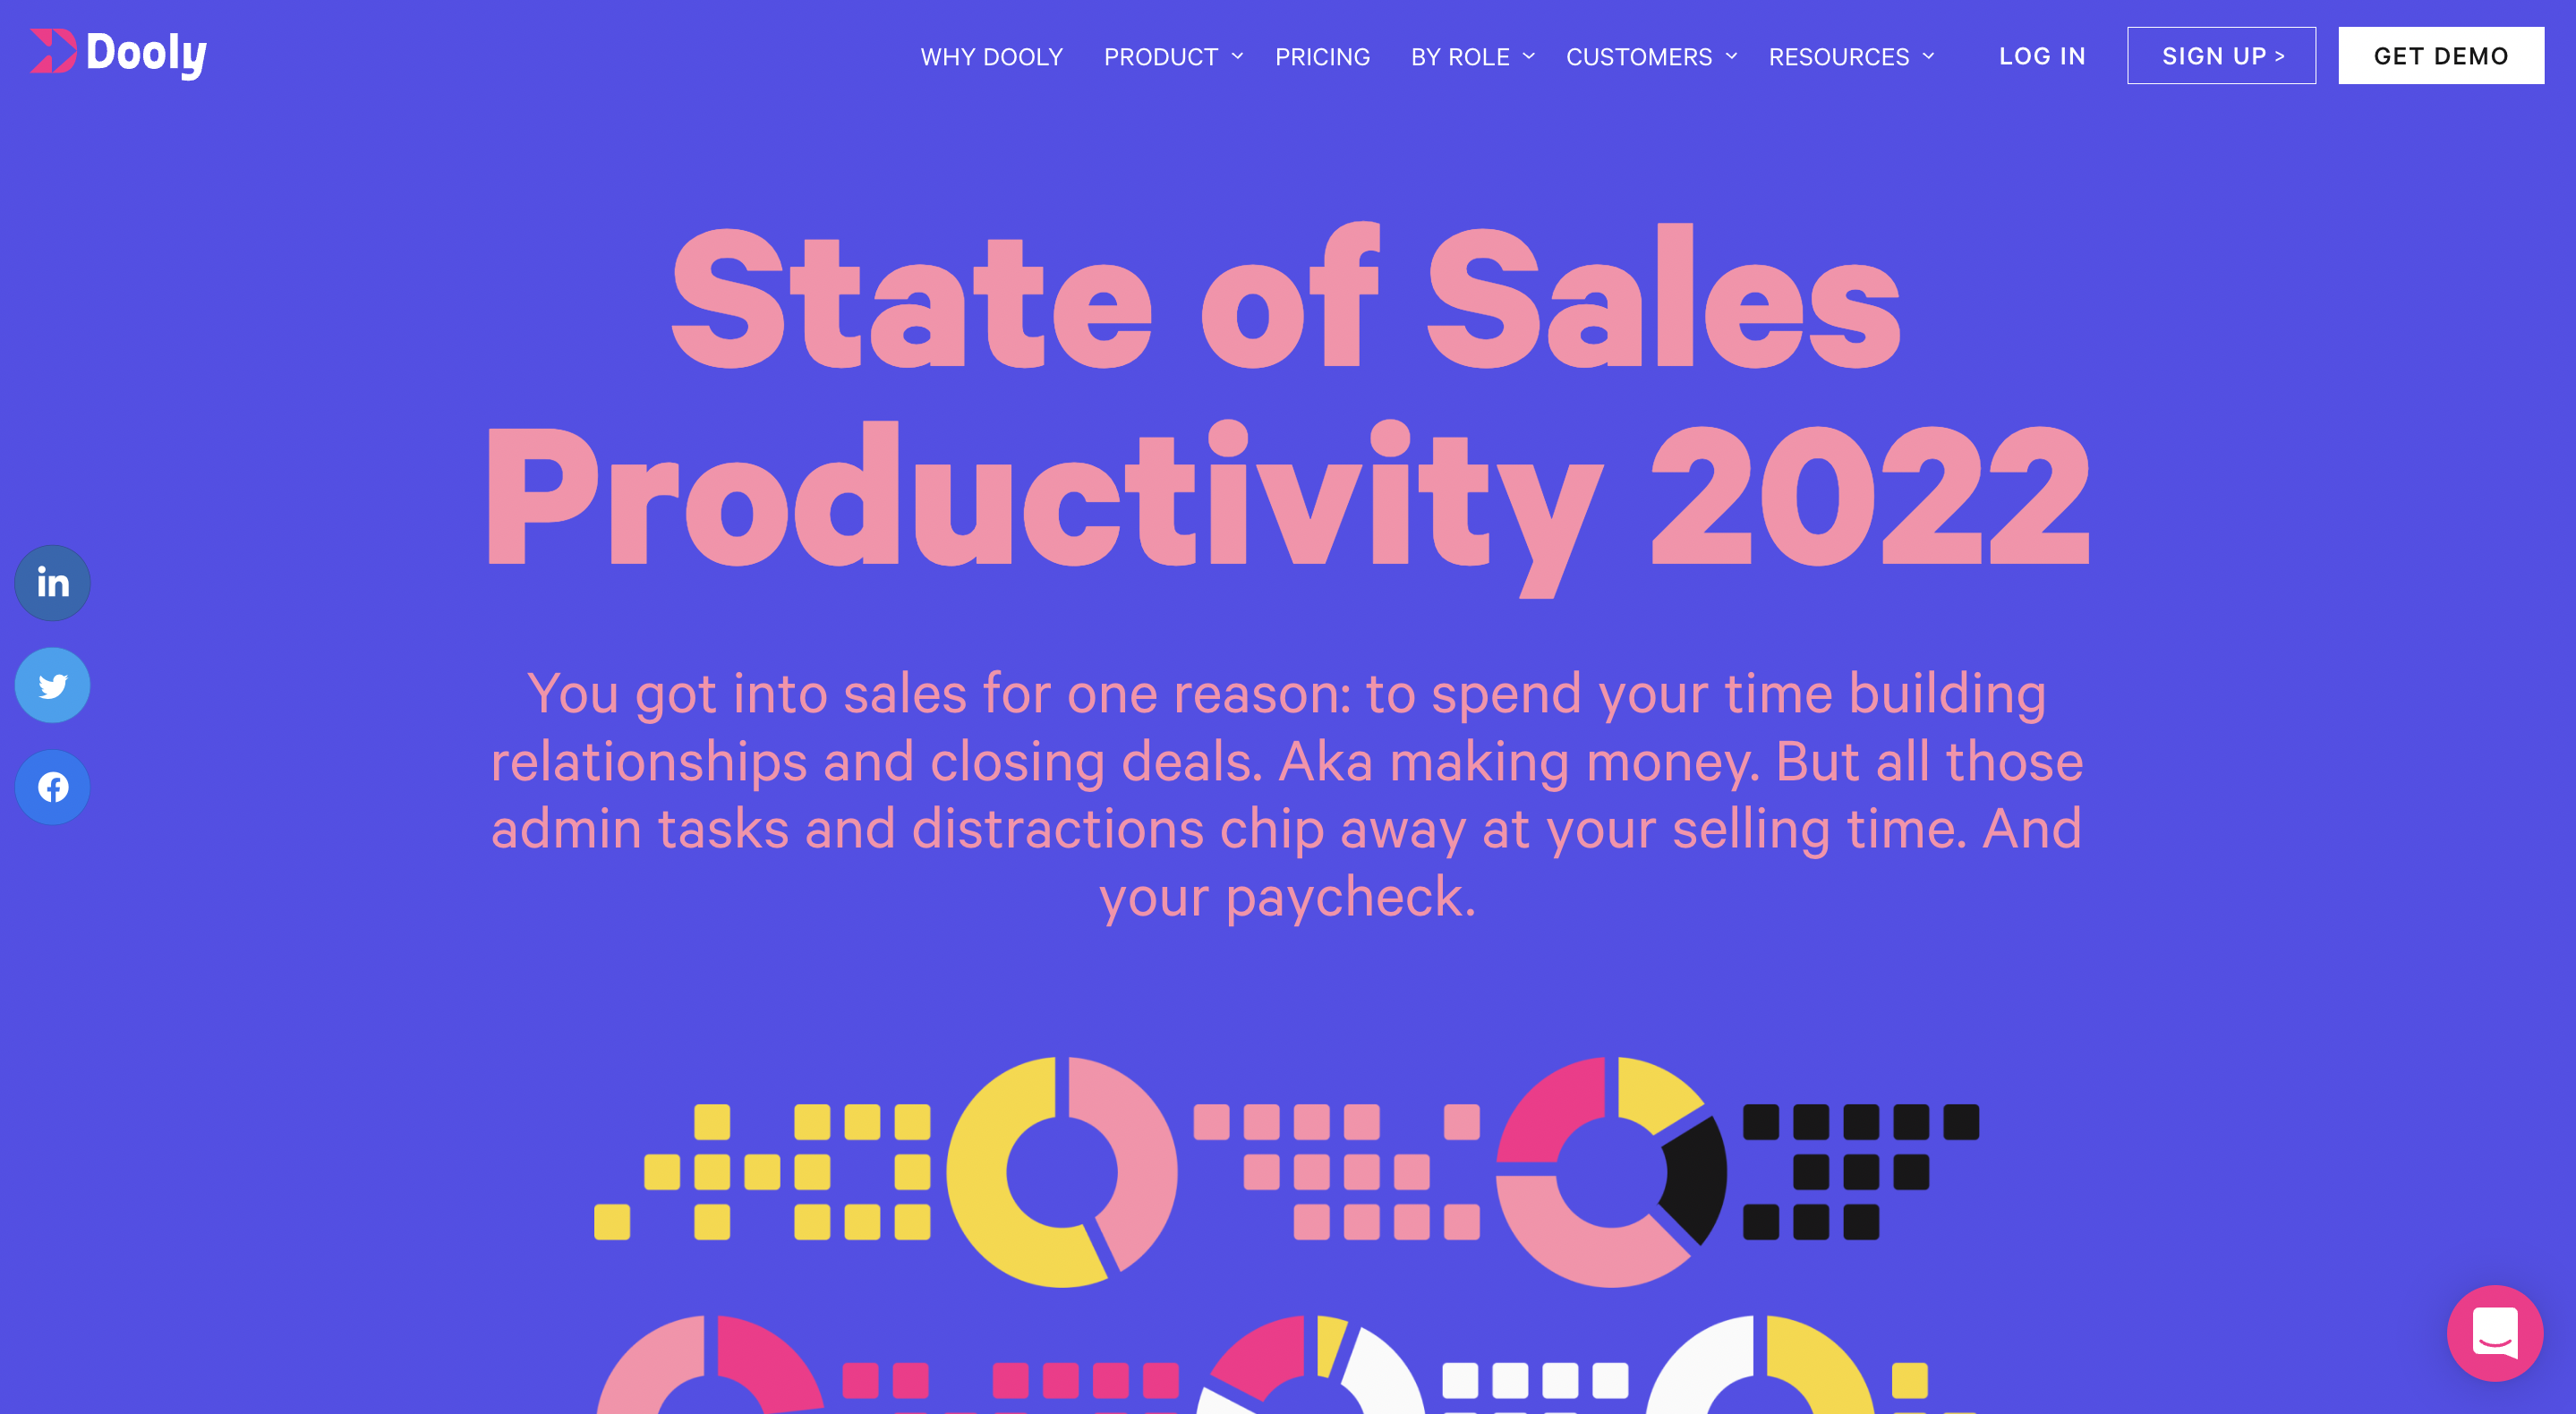 State of Sales Productivity 2022